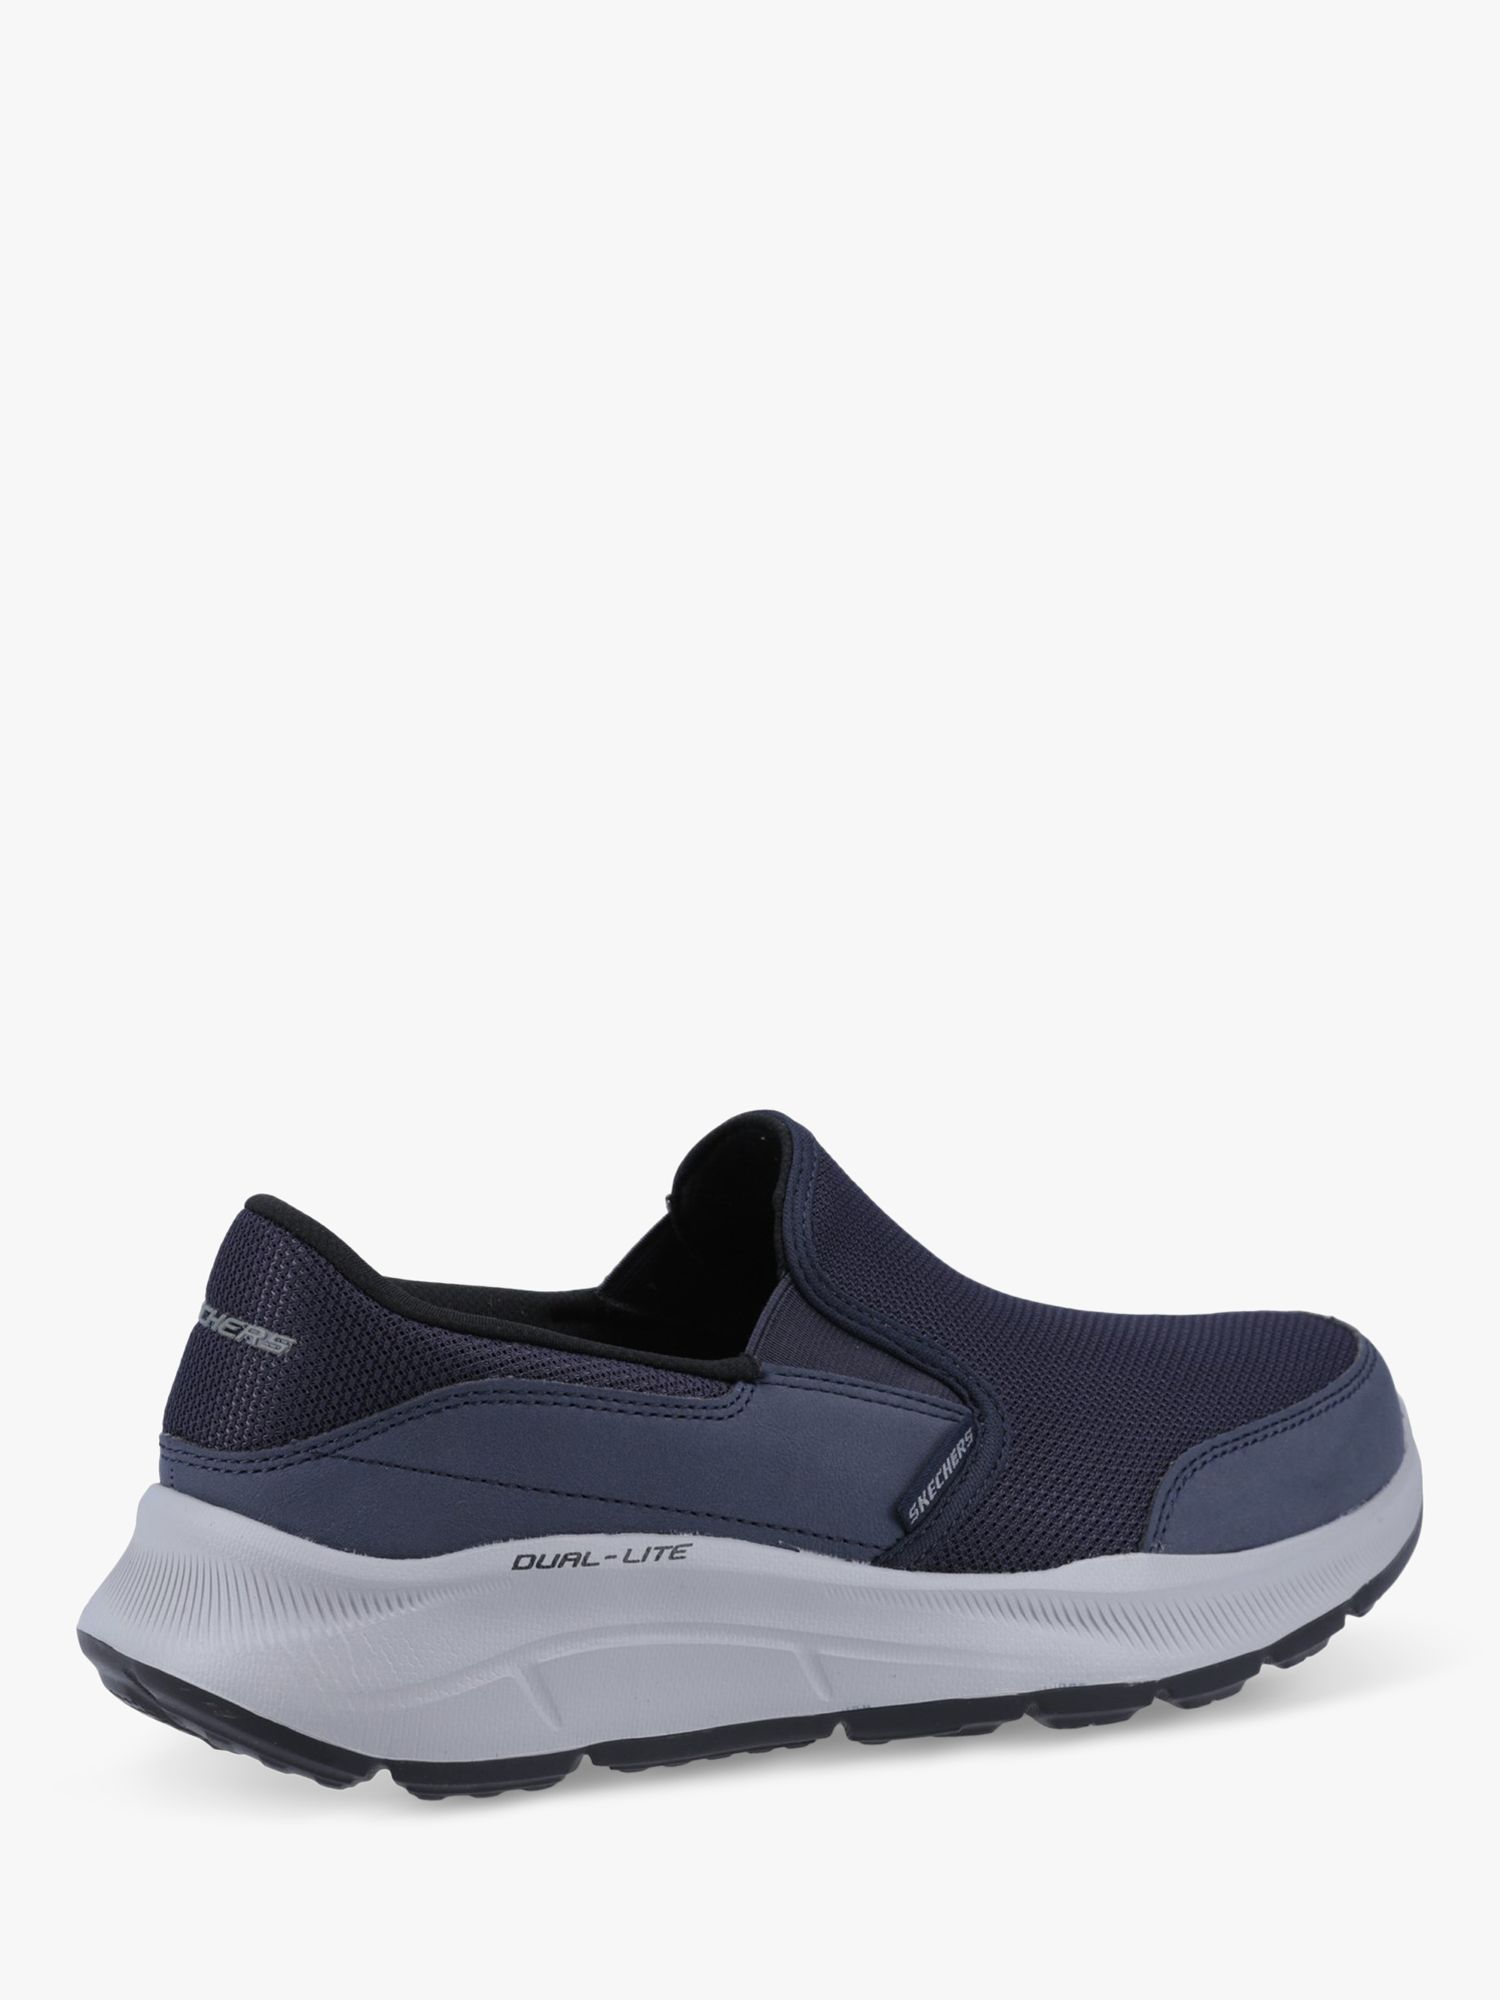 Skechers Equalizer 5.0 Persistable Slip On Trainers, Navy at John Lewis ...